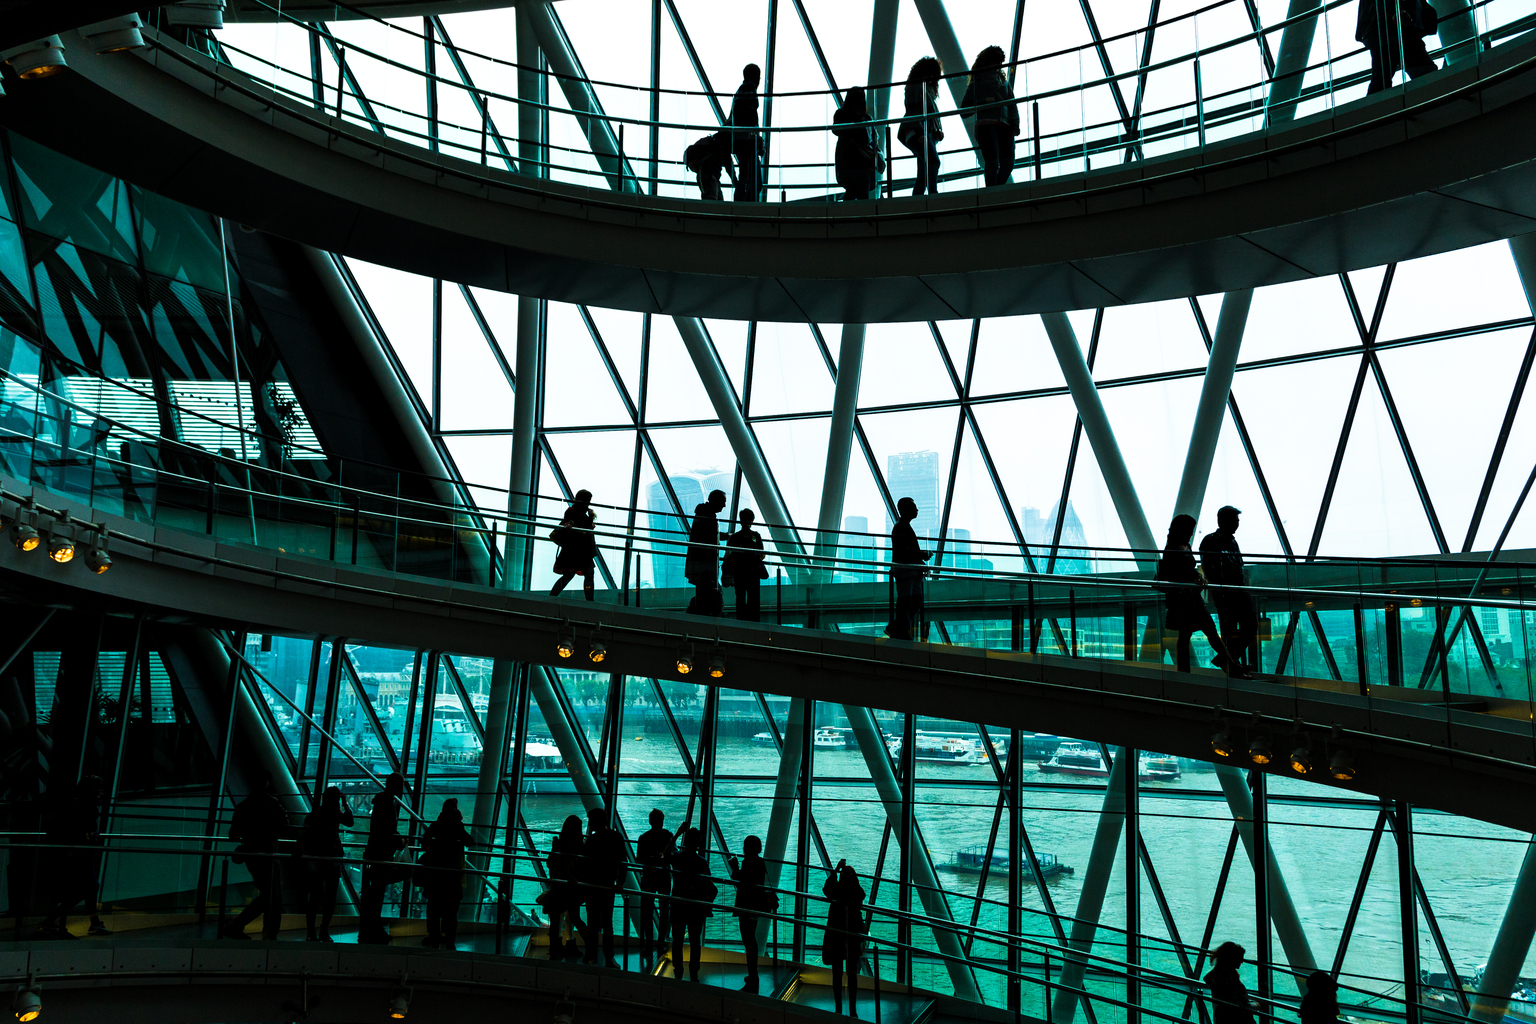 Abstract modern architecture and silhouettes of people on spiral staircase 